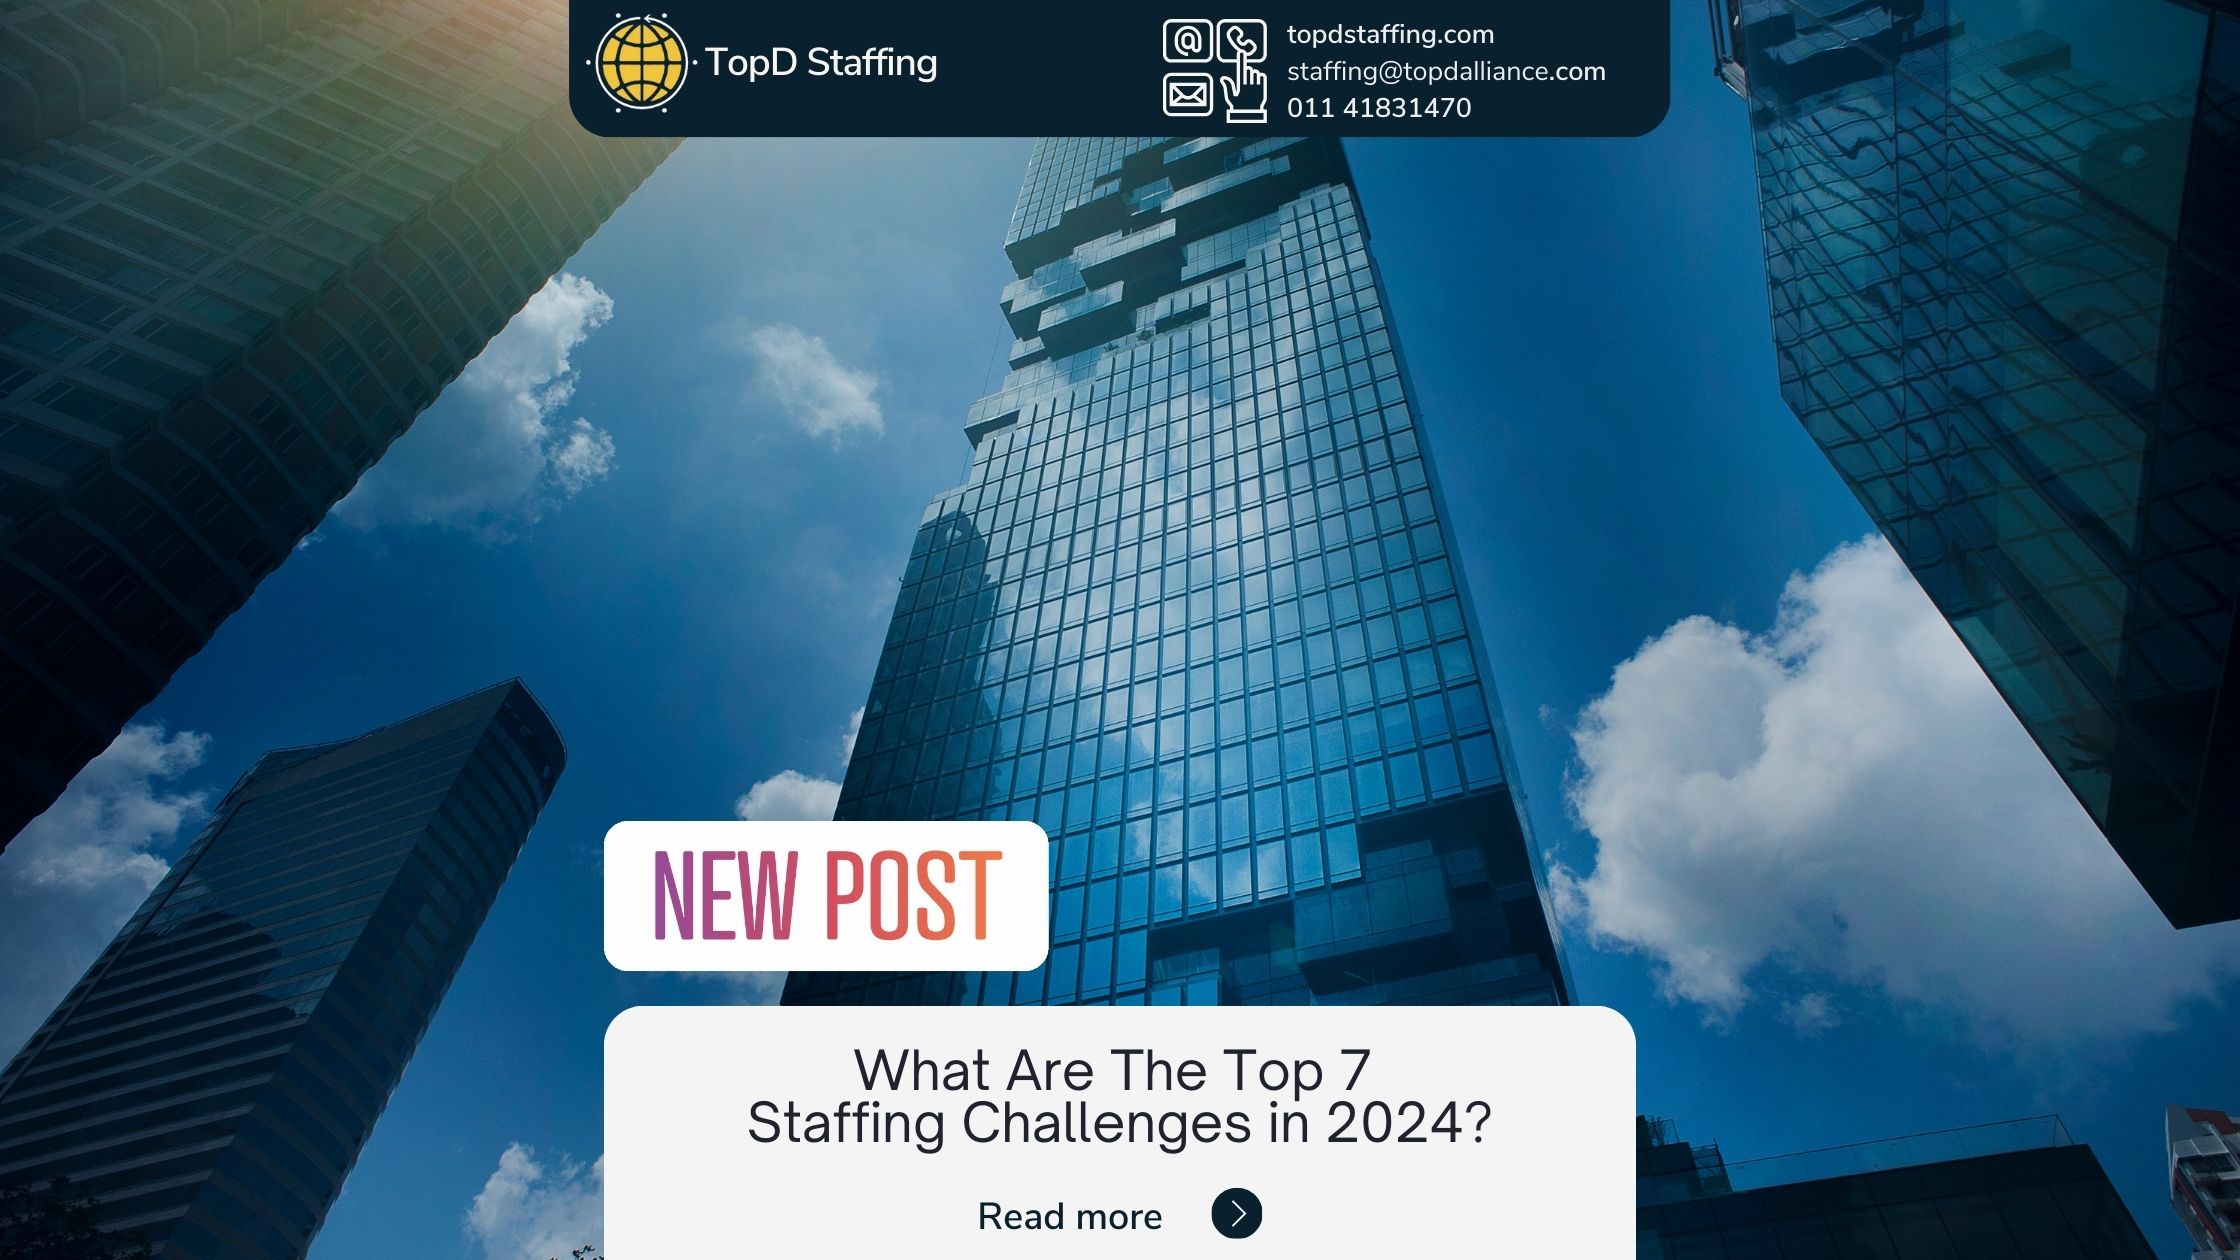 What Are The Top 7 Staffing Challenges in 2024?